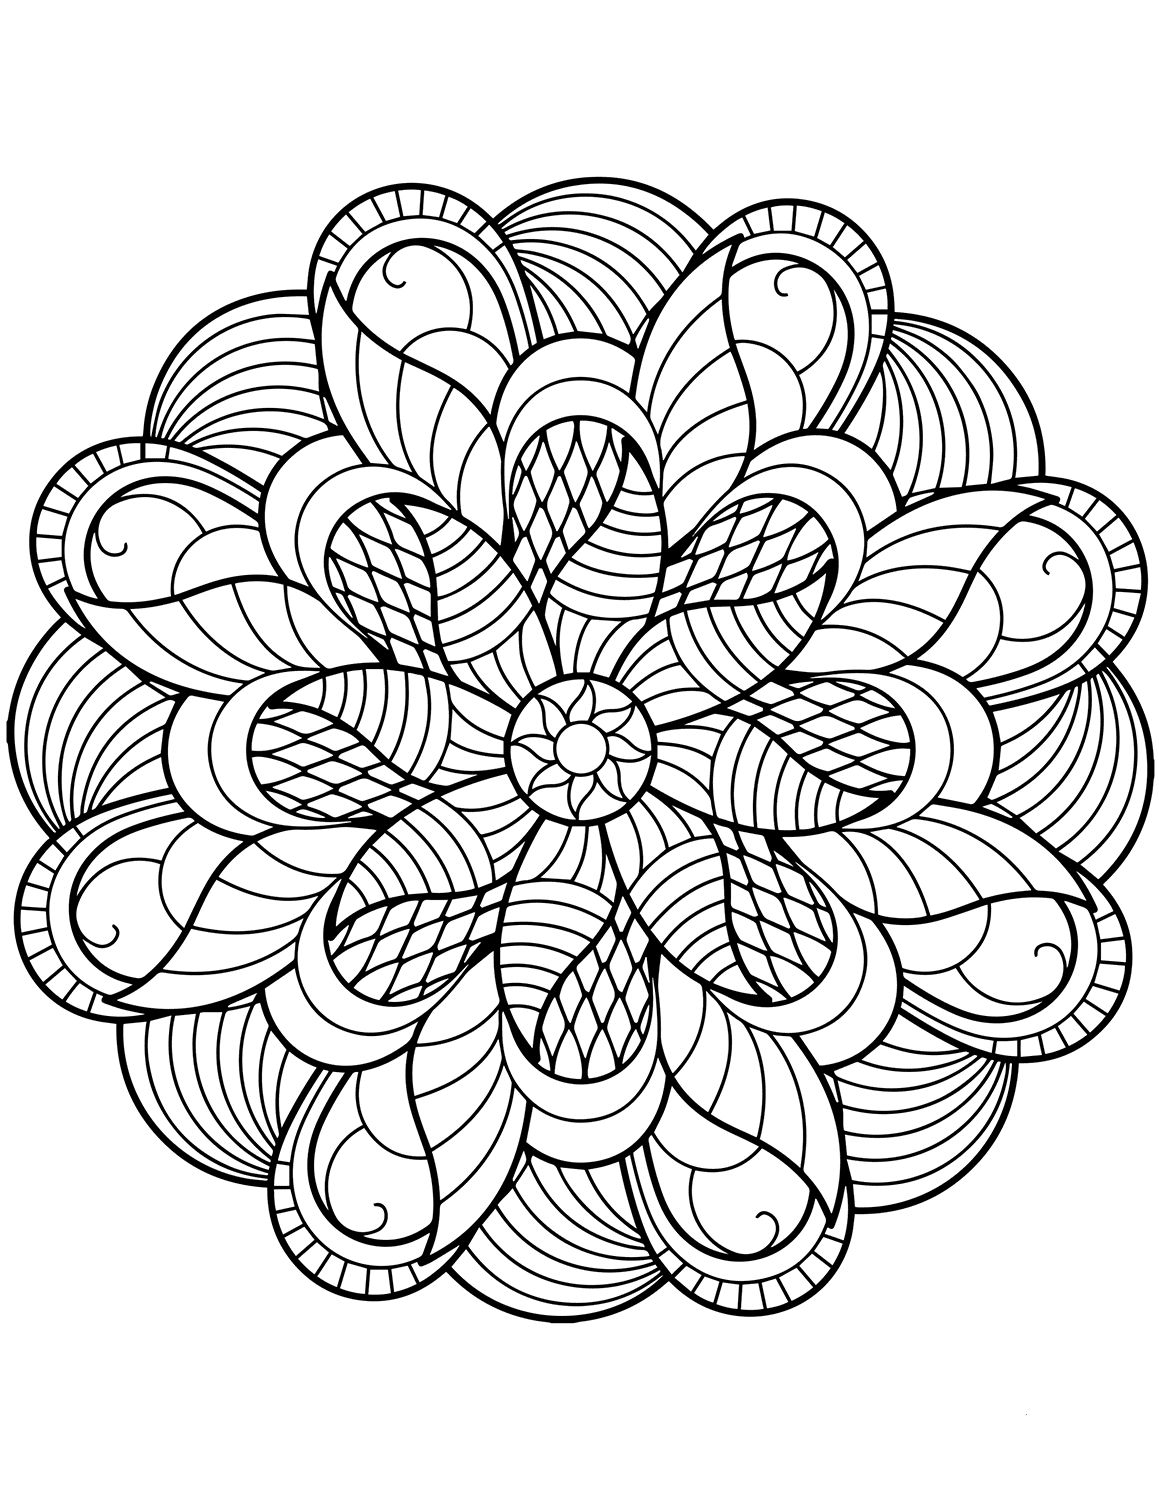 Mandala Coloring Pages For Adults Flower Mandala Coloring Pages Best Coloring Pages For Kids